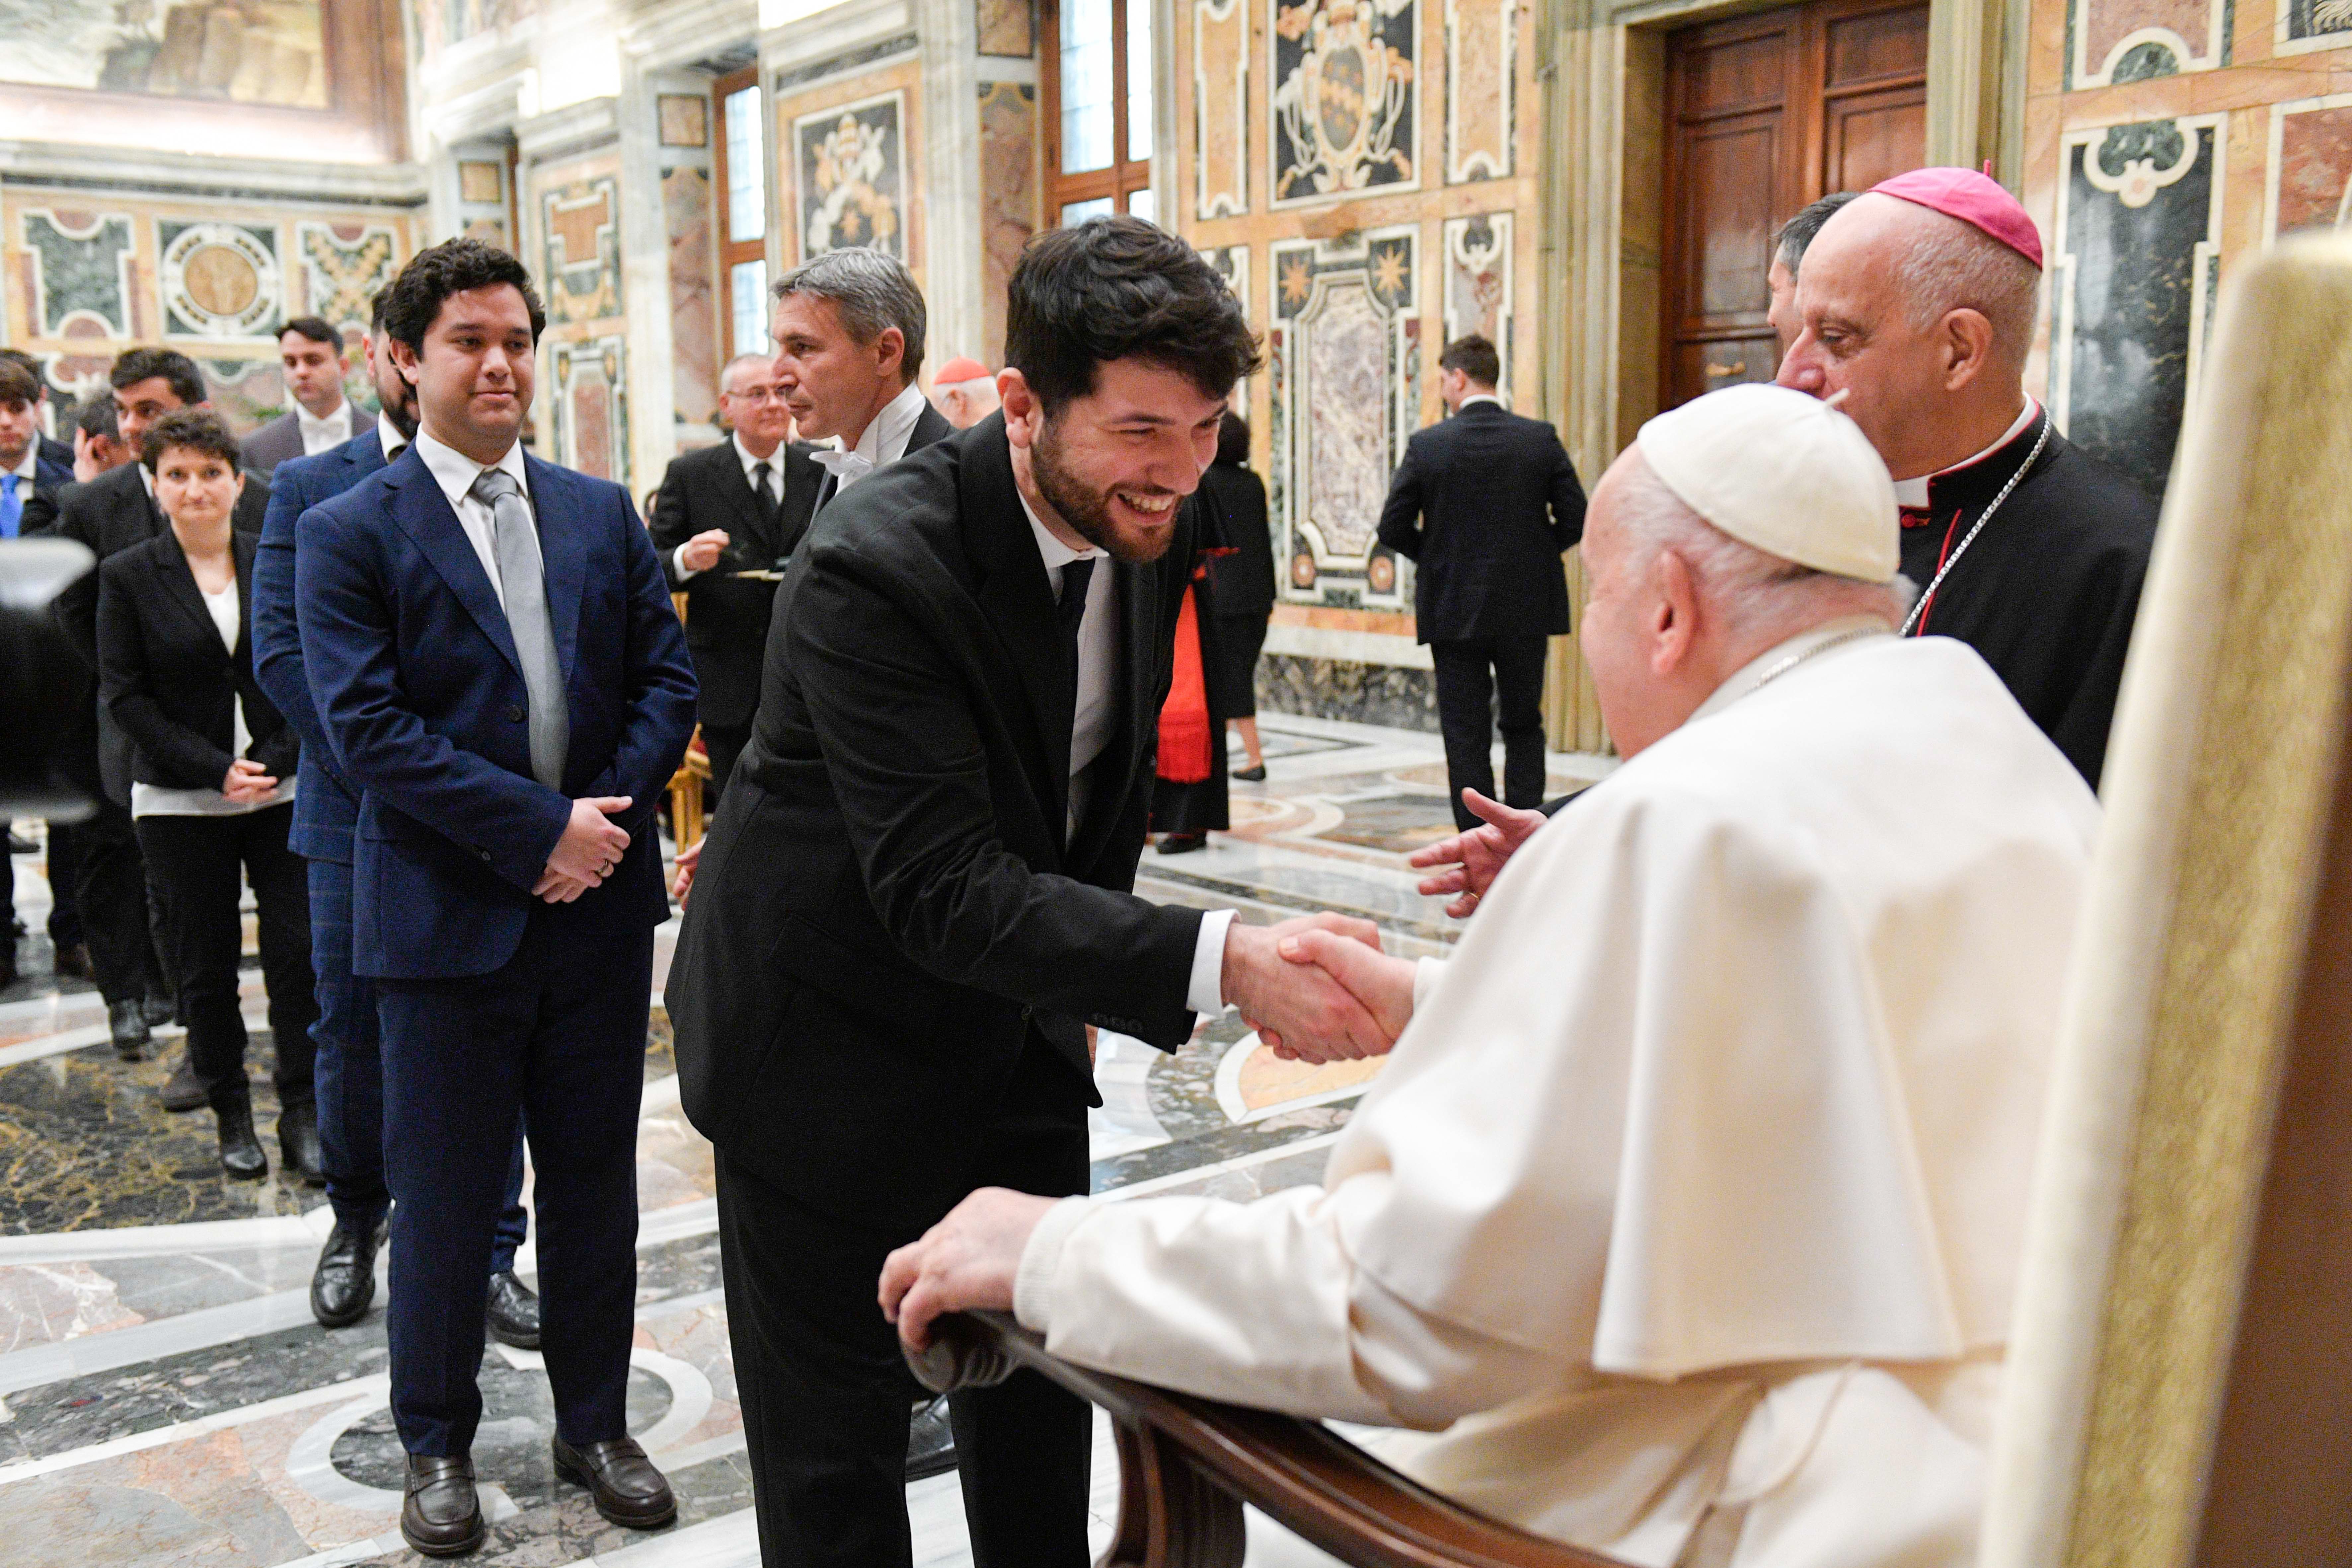 Pope Francis greets a member of the Dicastery for Evangelization.